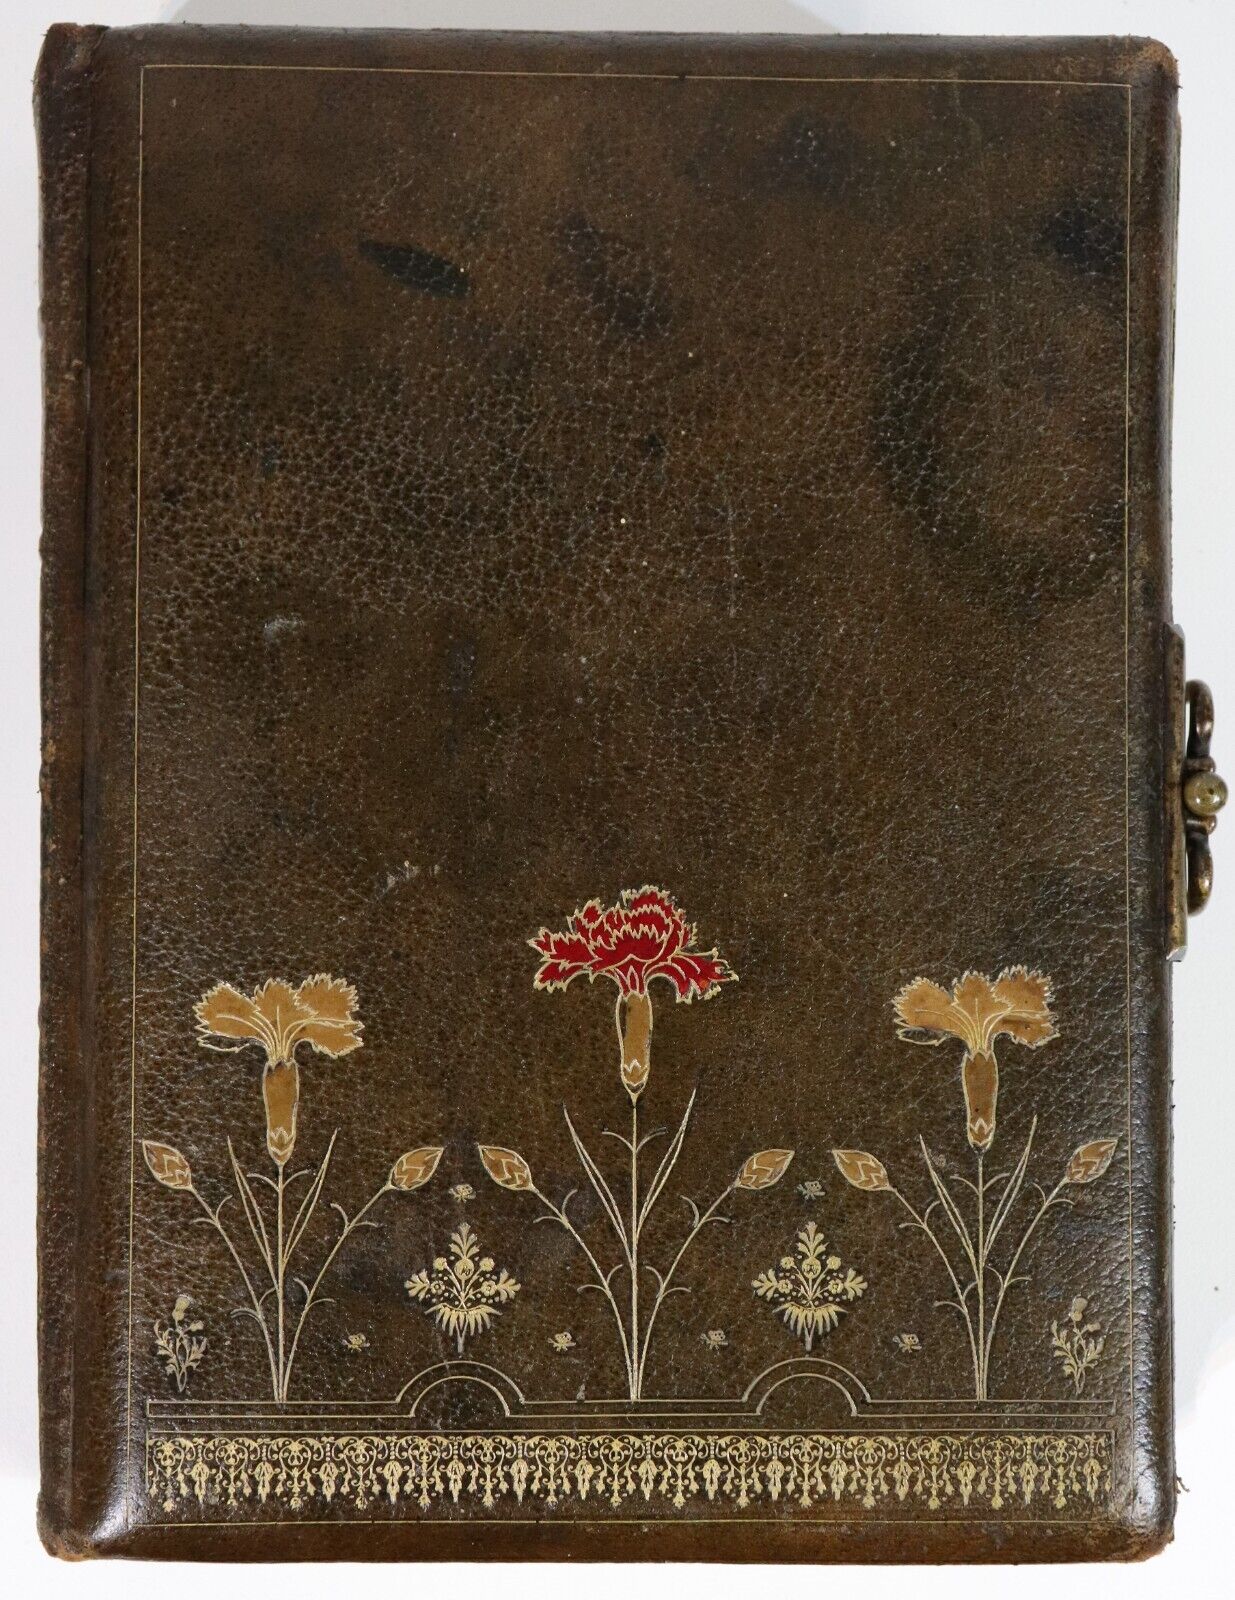 Antique Family Photo Album - c1915 - Leather, Floral Inlay & Clasp - WITH PHOTOS - 0